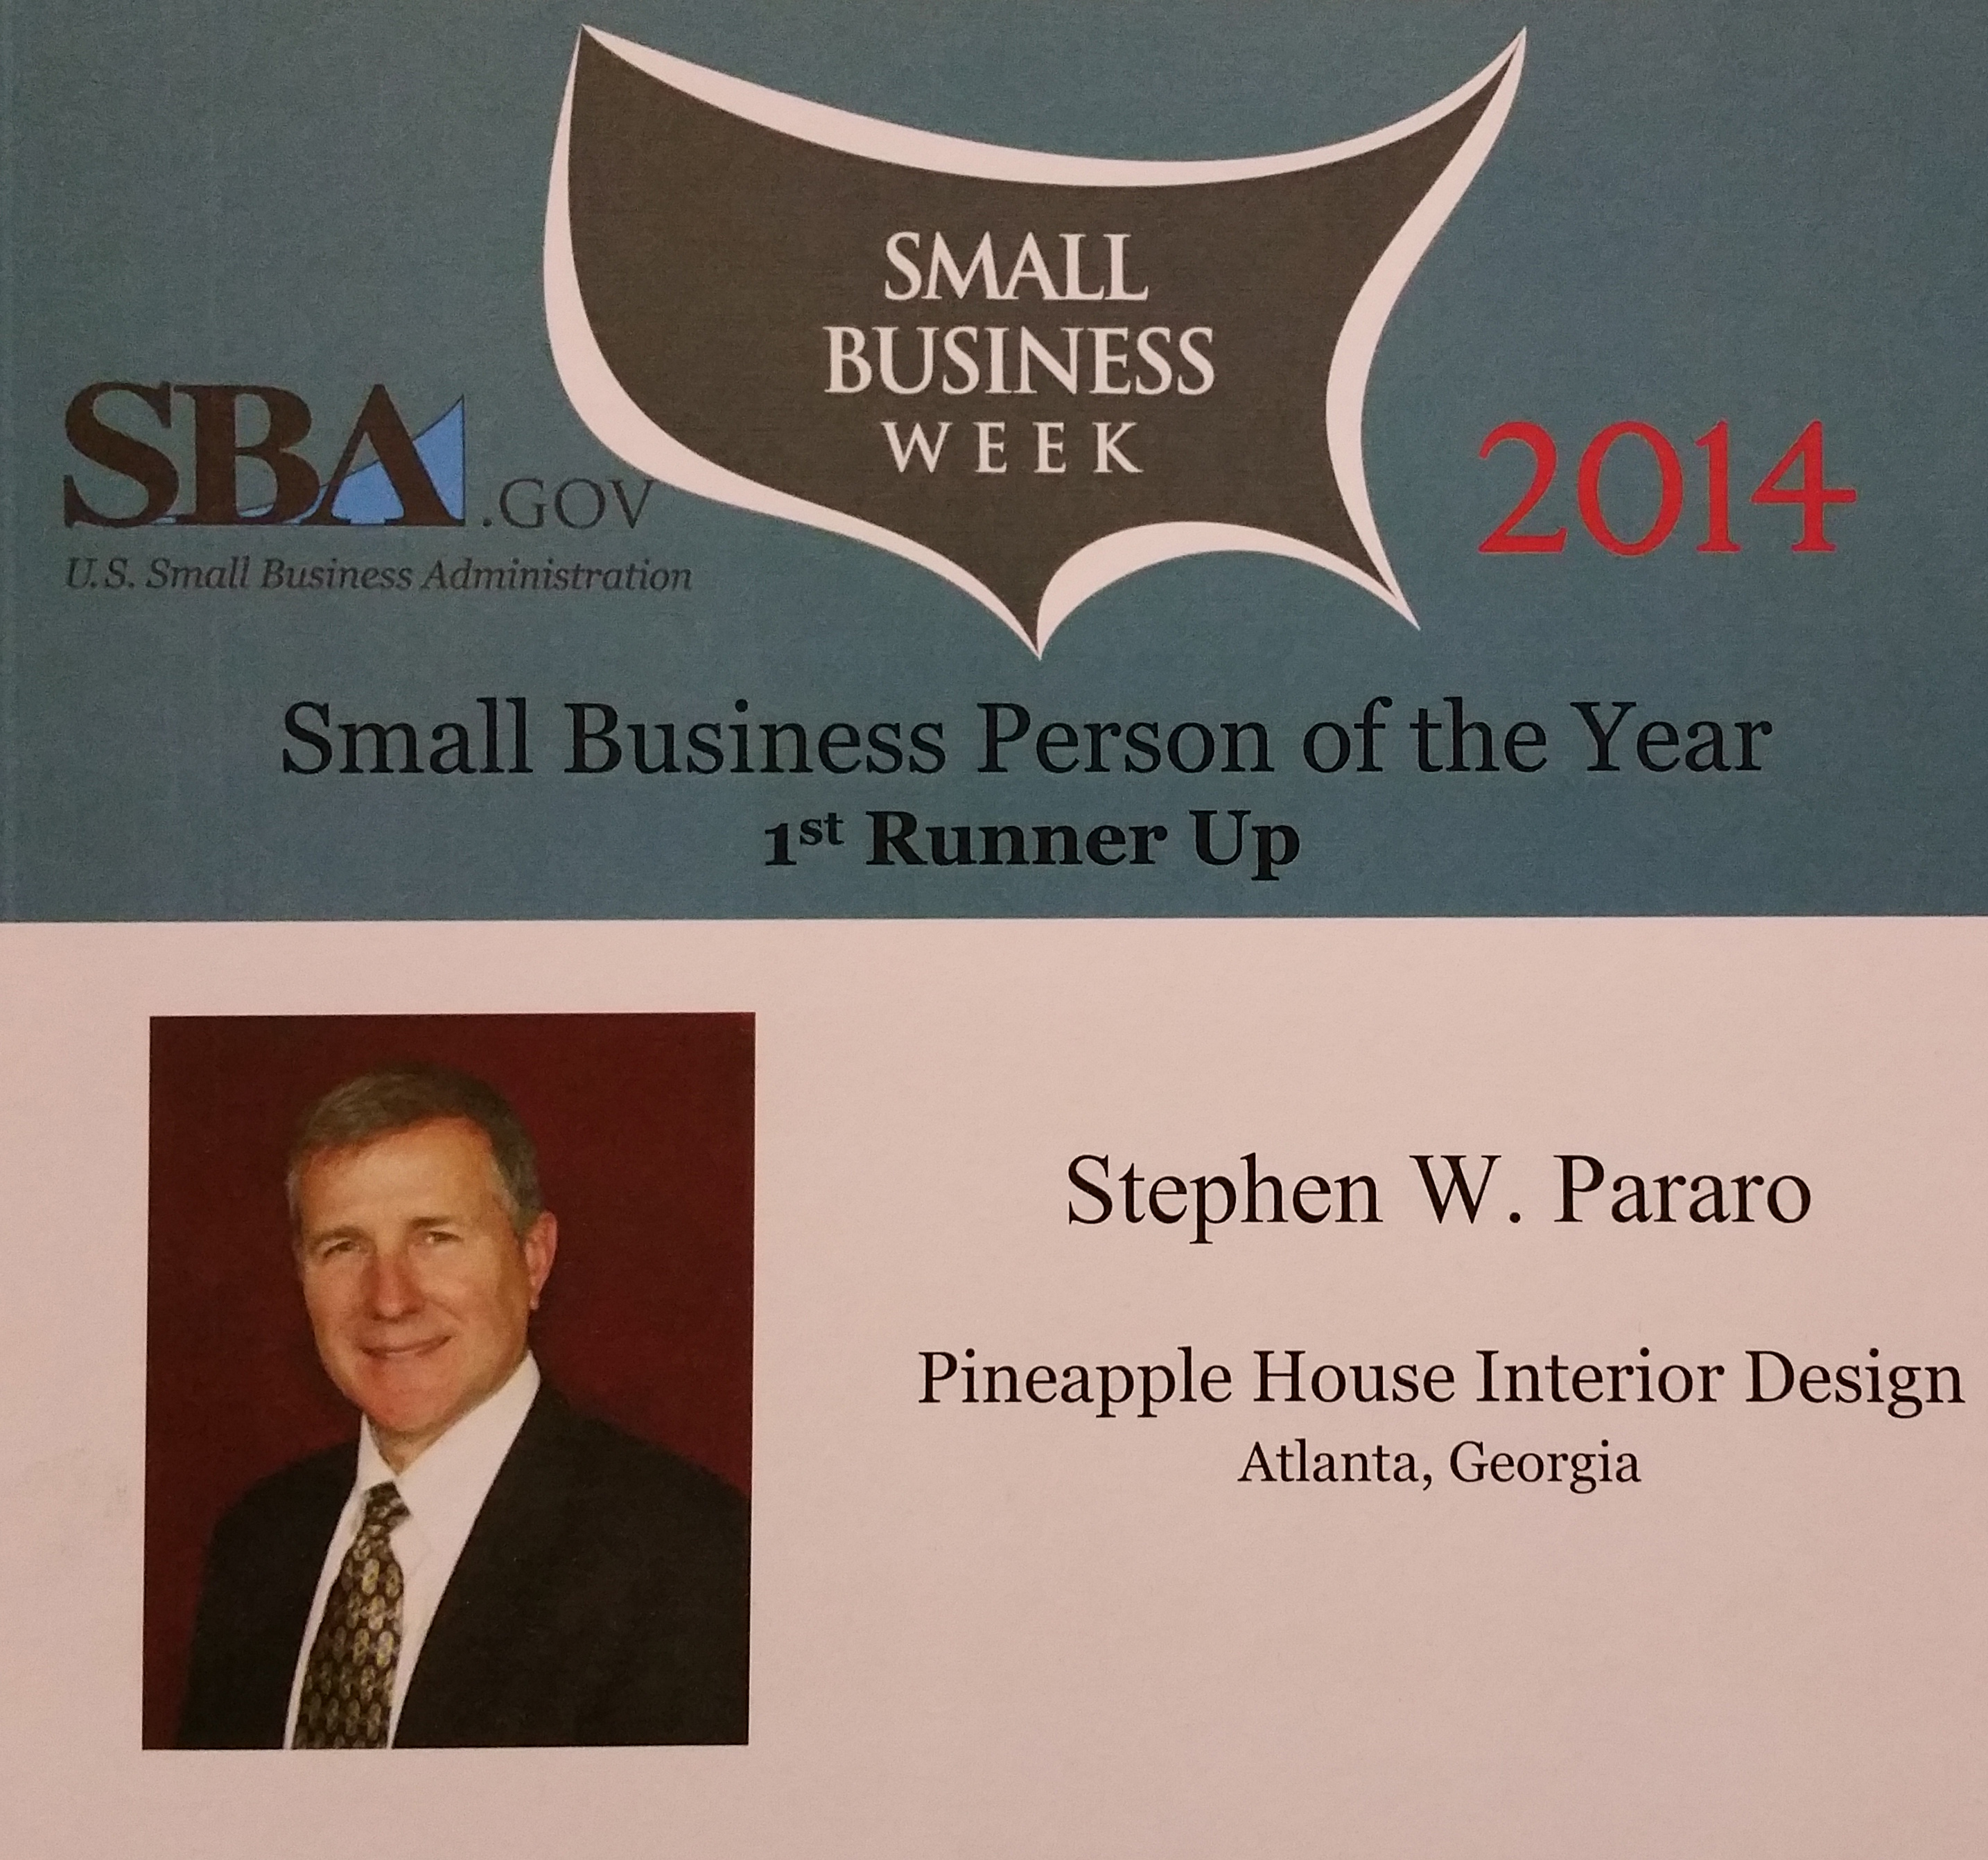 In addition to 35 years of earning design awards & architectural honors, Pineapple House's Stephen Pararo has been recognized nationally for his entrepreneurial achievements & community contributions.